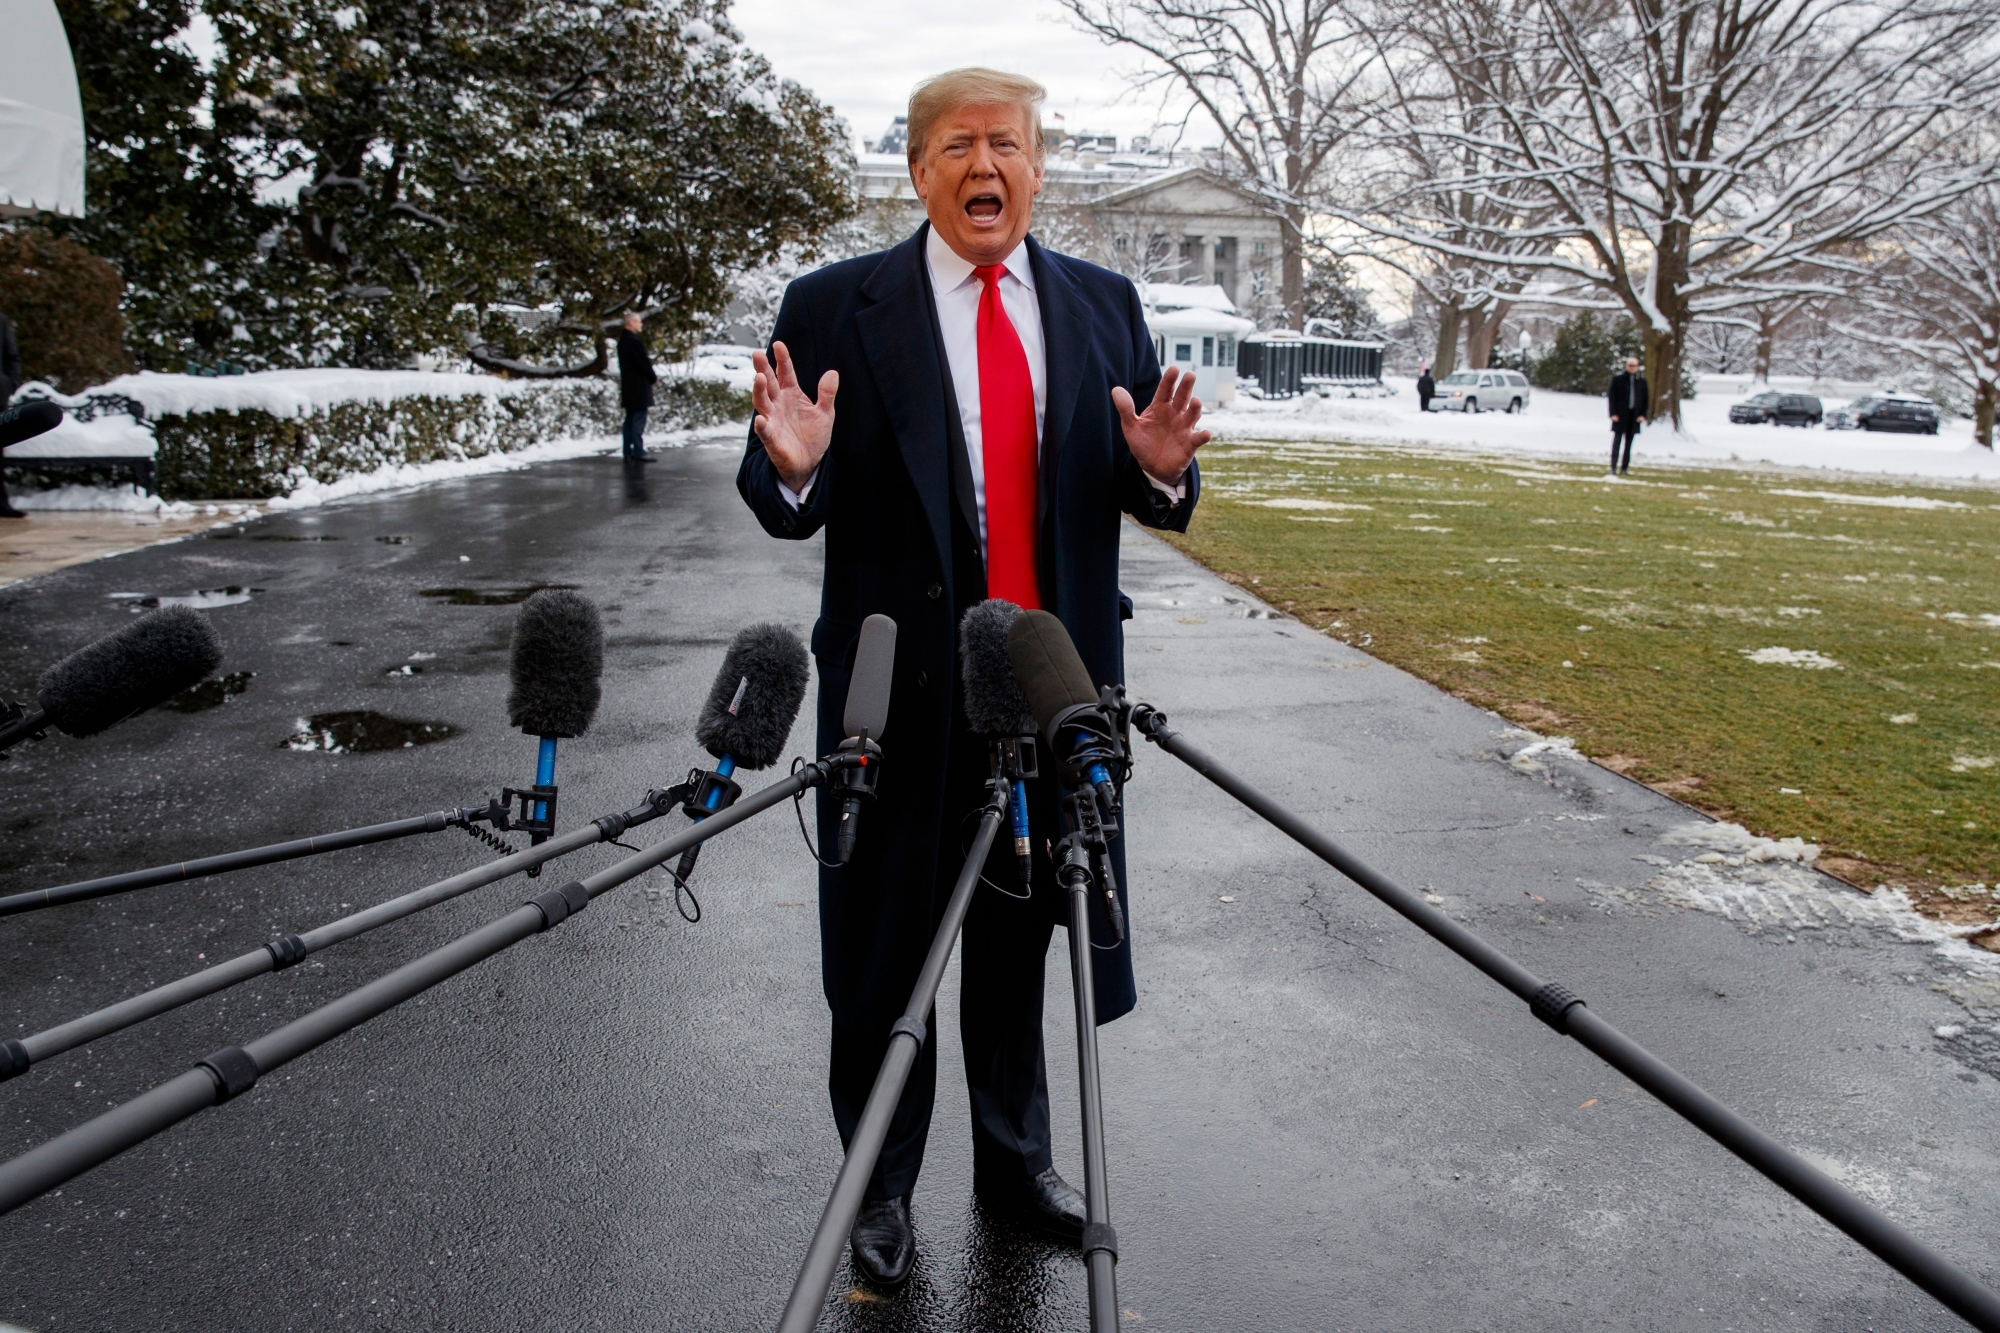 President Donald Trump talks with reporters on the South Lawn of the White House before departing for the American Farm Bureau Federation's 100th Annual Convention in New Orleans, Monday, Jan. 14, 2019, in Washington. (AP Photo/ Evan Vucci) Trump